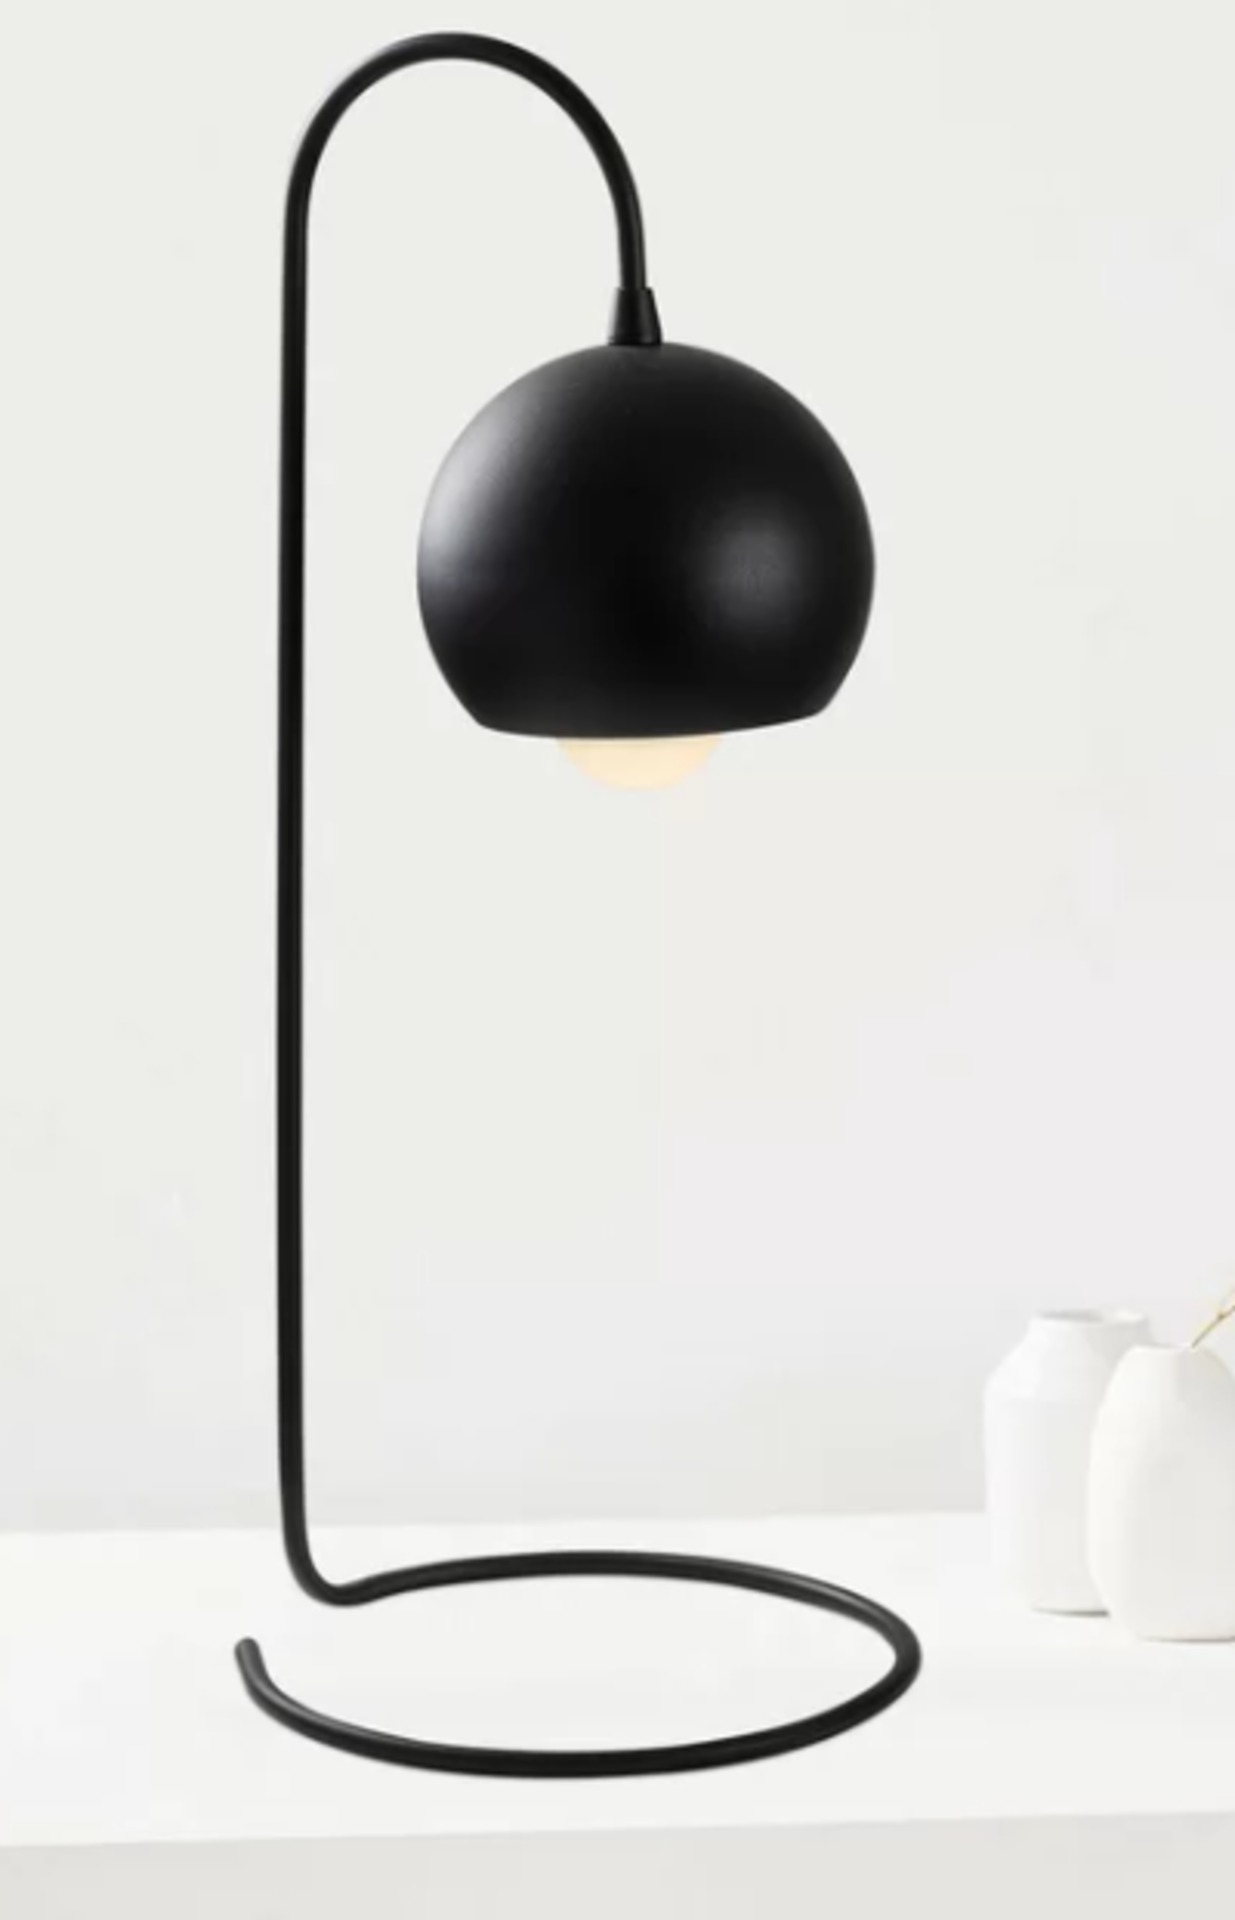 Mercury Row Beallsville 56Cm Black Desk Lamp with Outlet. - SR4. With its sleek silhouette and